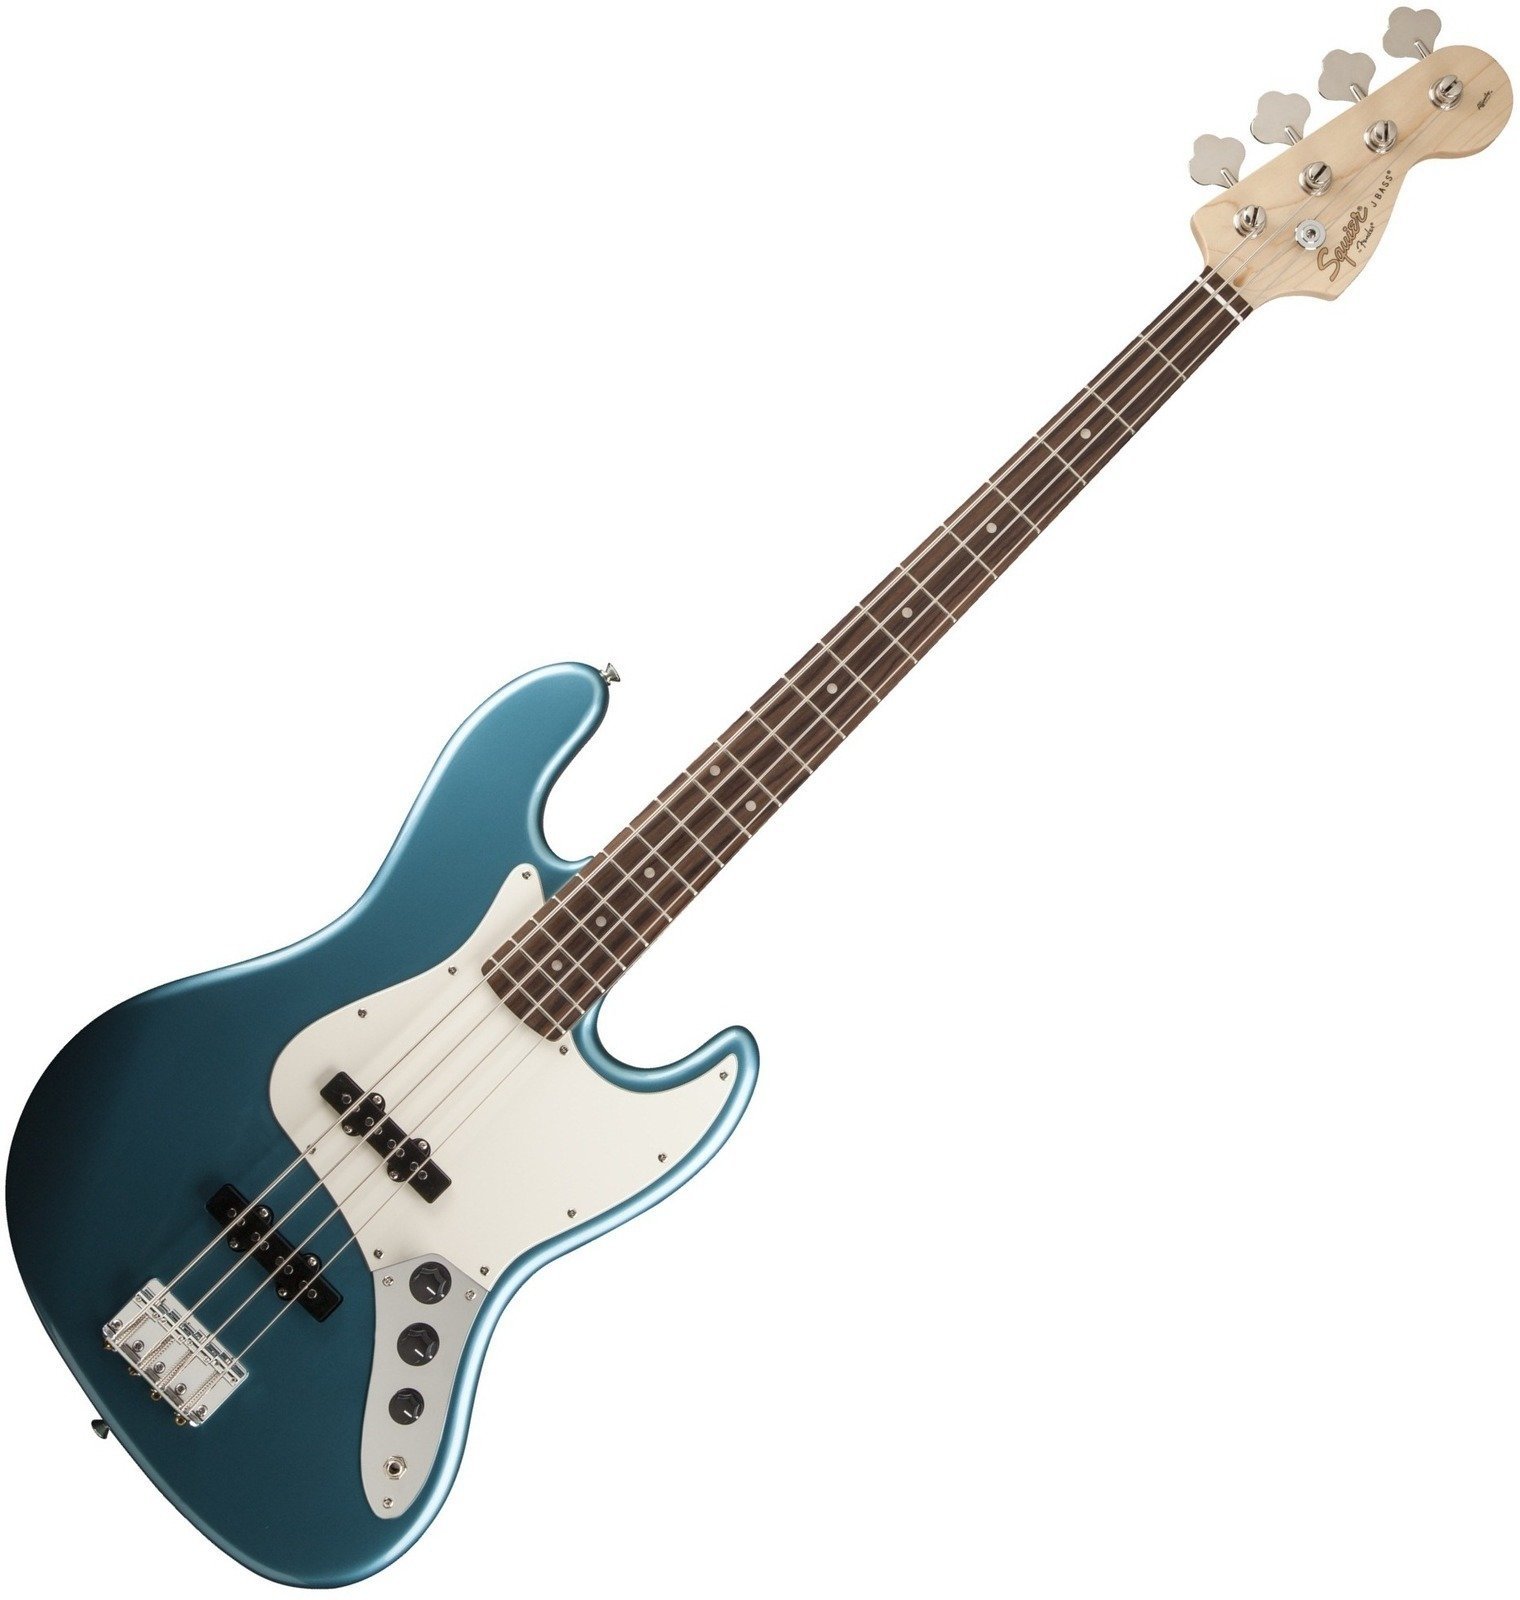 E-Bass Fender Squier Affinity Series Jazz Bass Lake Placid Blue